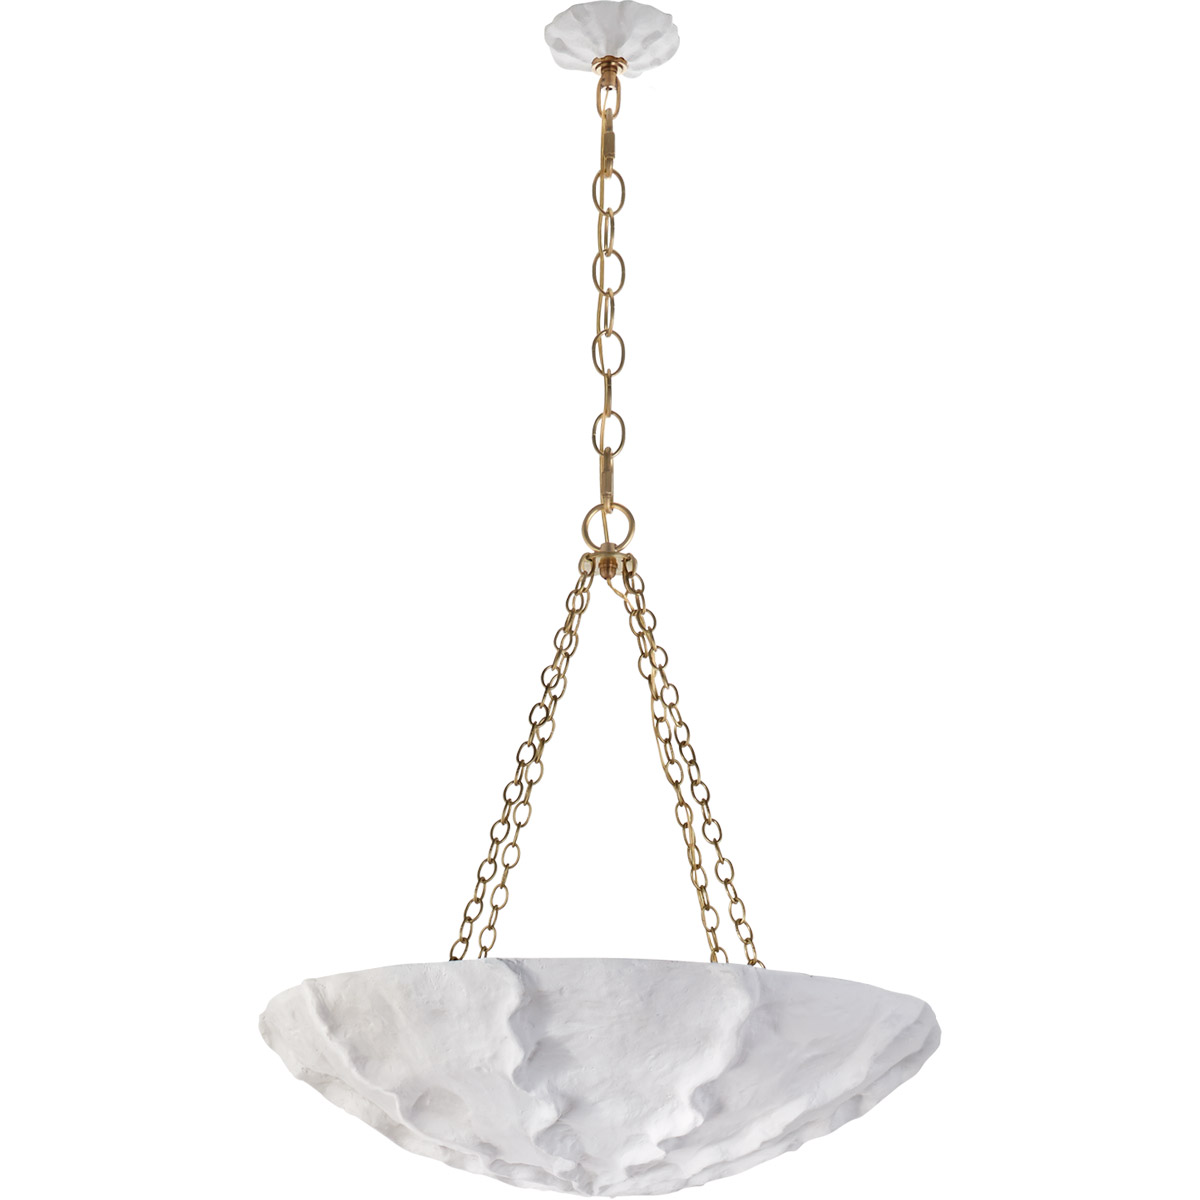 Visual Comfort Signature Collection | Visual Comfort ARN5426PW AERIN Benit  4 Light 32 inch Plaster White Sculpted Chandelier Ceiling Light, Medium